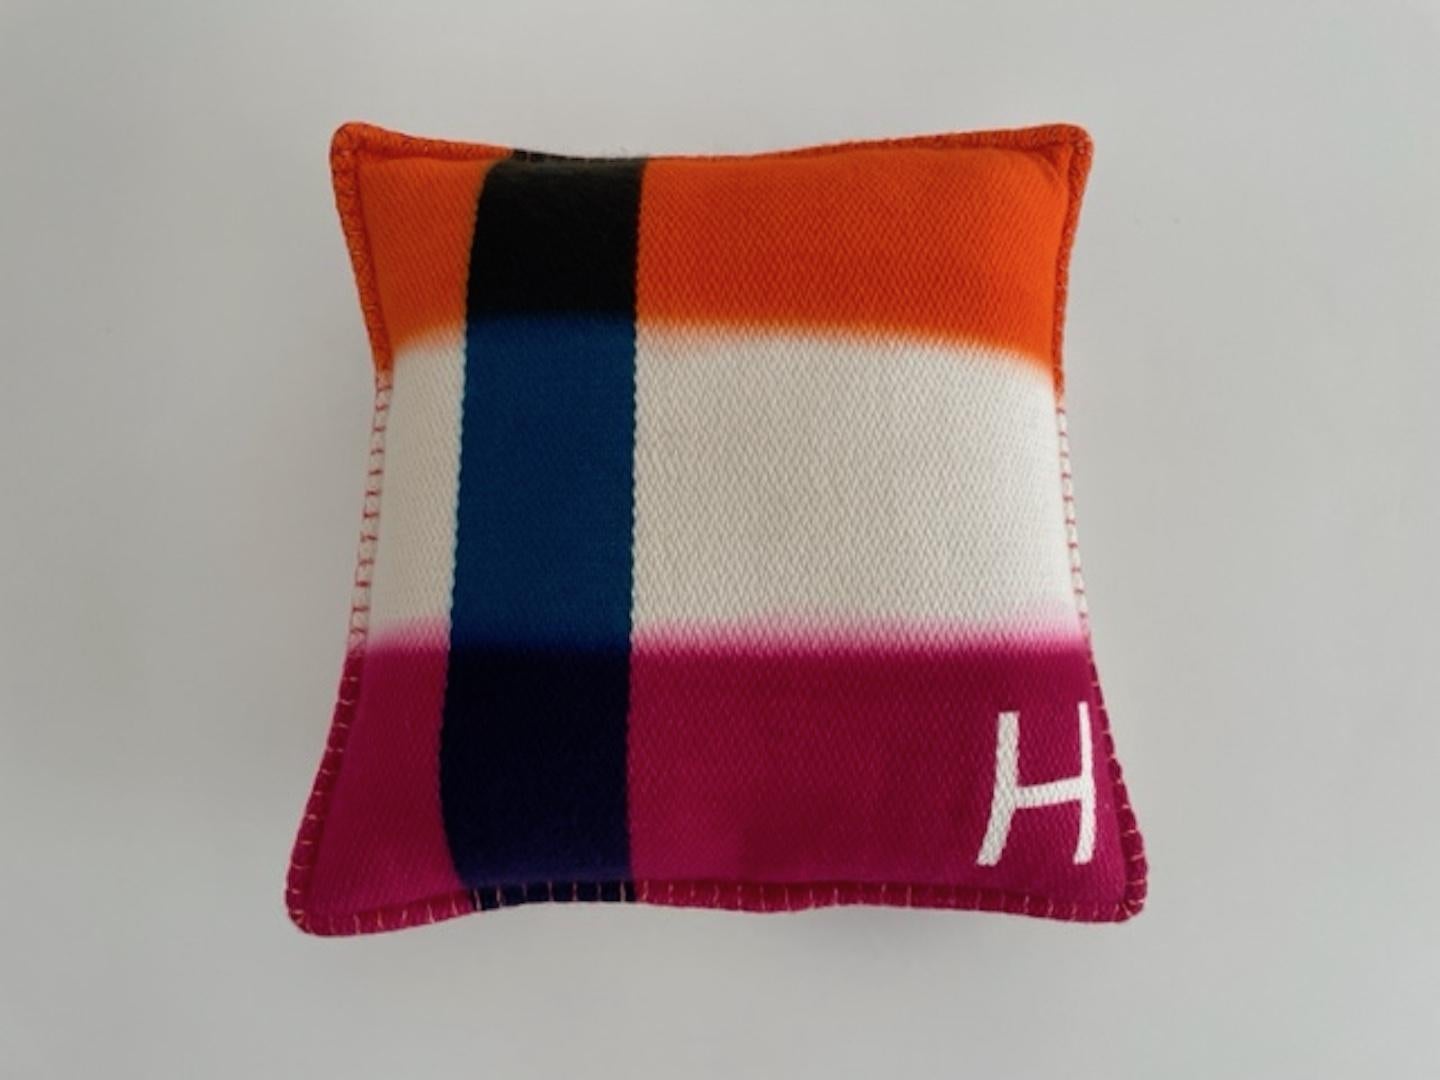 H Dye pillow by Hermes
Cushion in hand-spun, woven and dyed cashmere
Original – pre owned but never used
- 100% Mongolian cashmere lining
- Polyester padding
- Crotch stitch finish
- Non-removable cushion
Made in Nepal
Designed by Studio